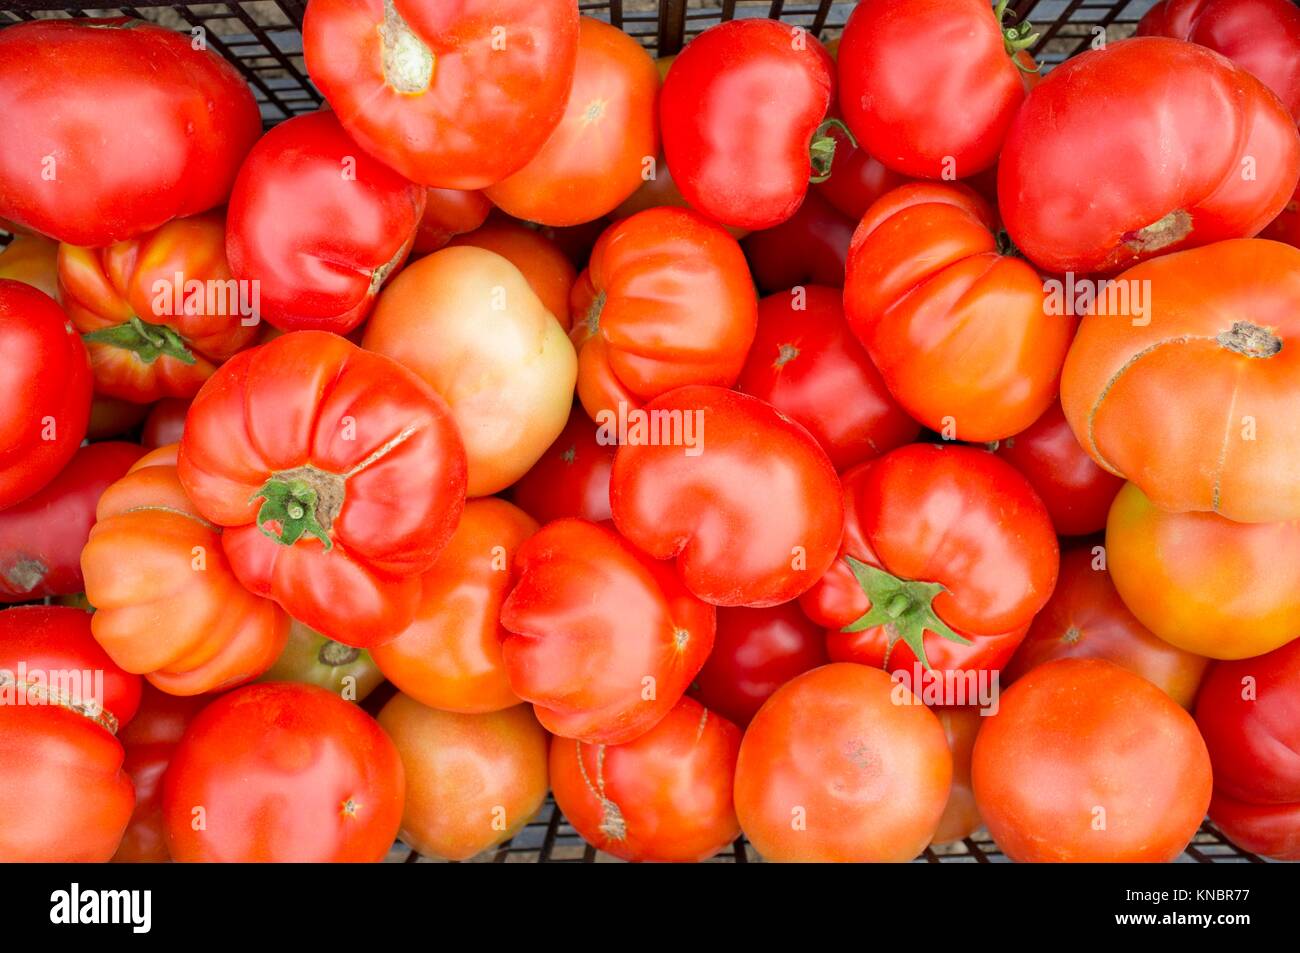 Boxes full of tomatoes just collected at local farm. Sustainable agriculture production. Stock Photo